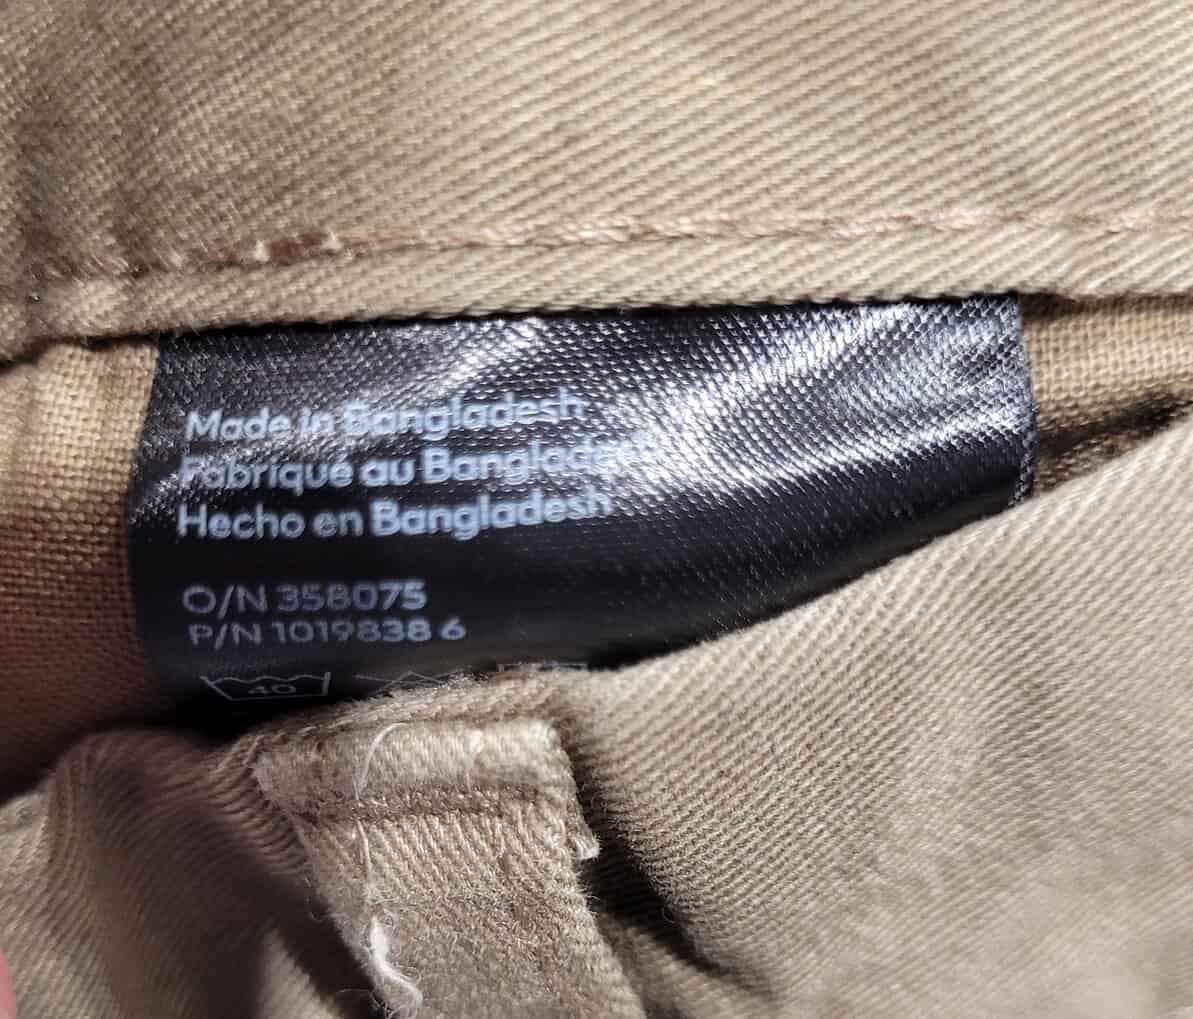 Where Are H&M Clothes Made? In China? - The Men Hero